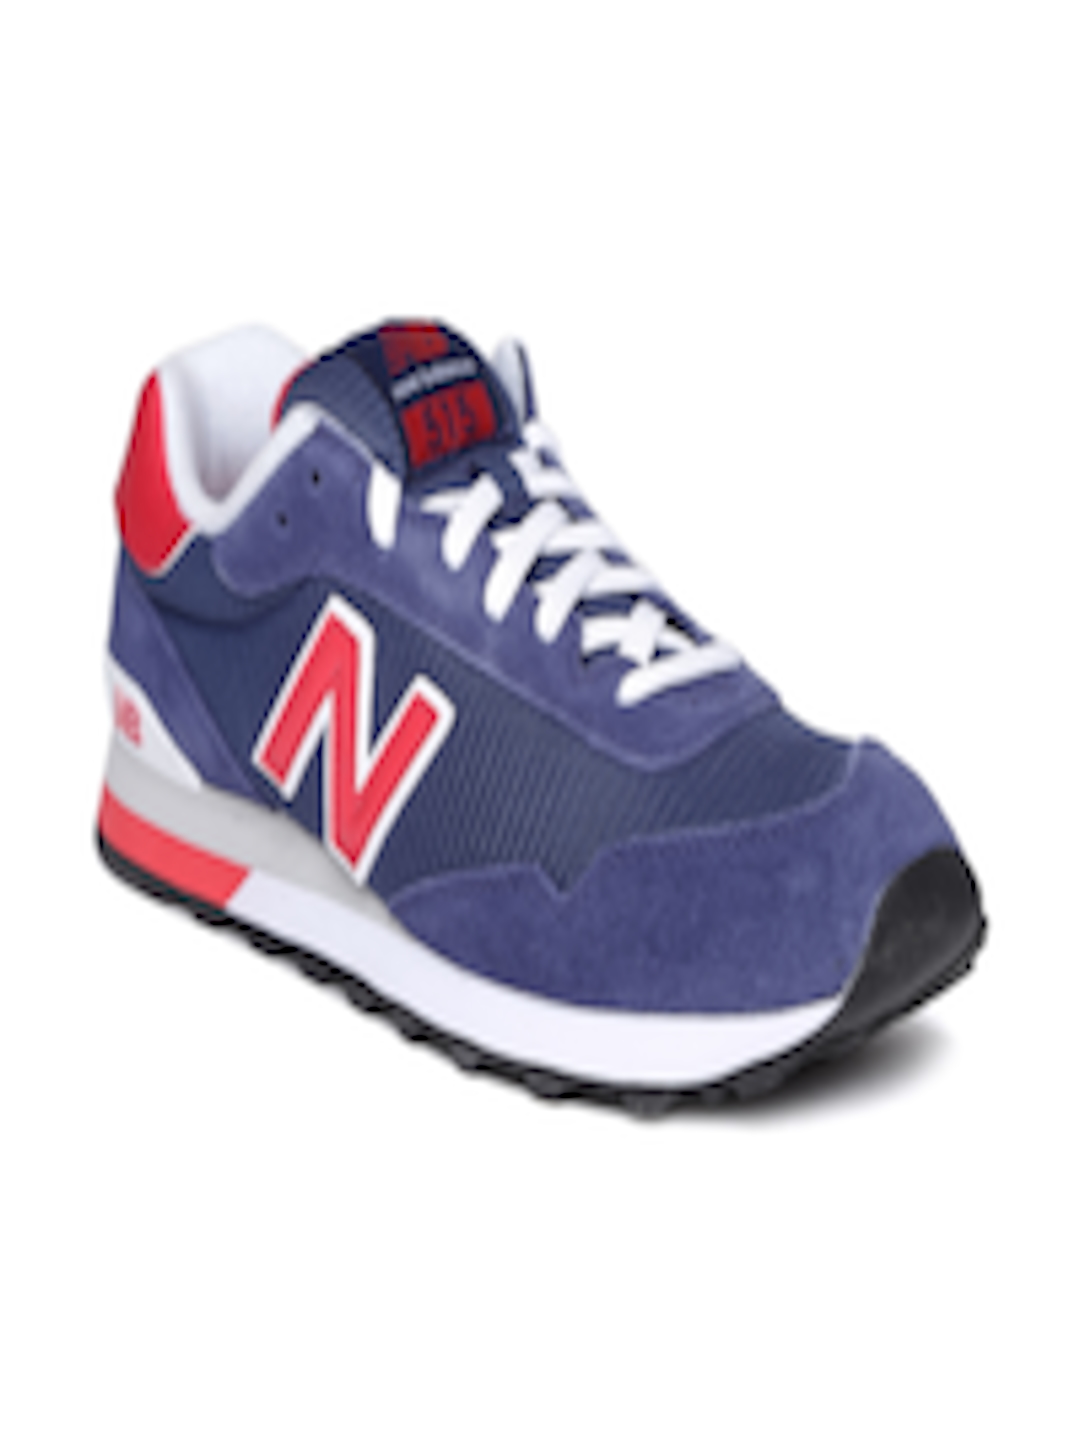 Buy New Balance Men Navy Sneakers - Casual Shoes for Men 1572901 | Myntra